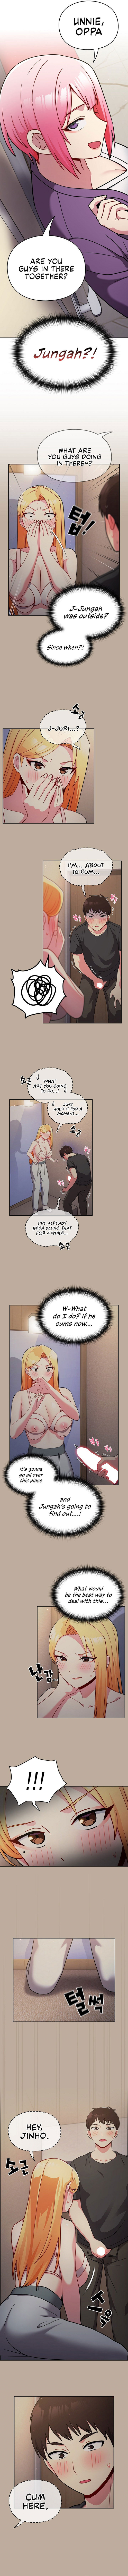 when-did-we-start-dating-chap-32-5